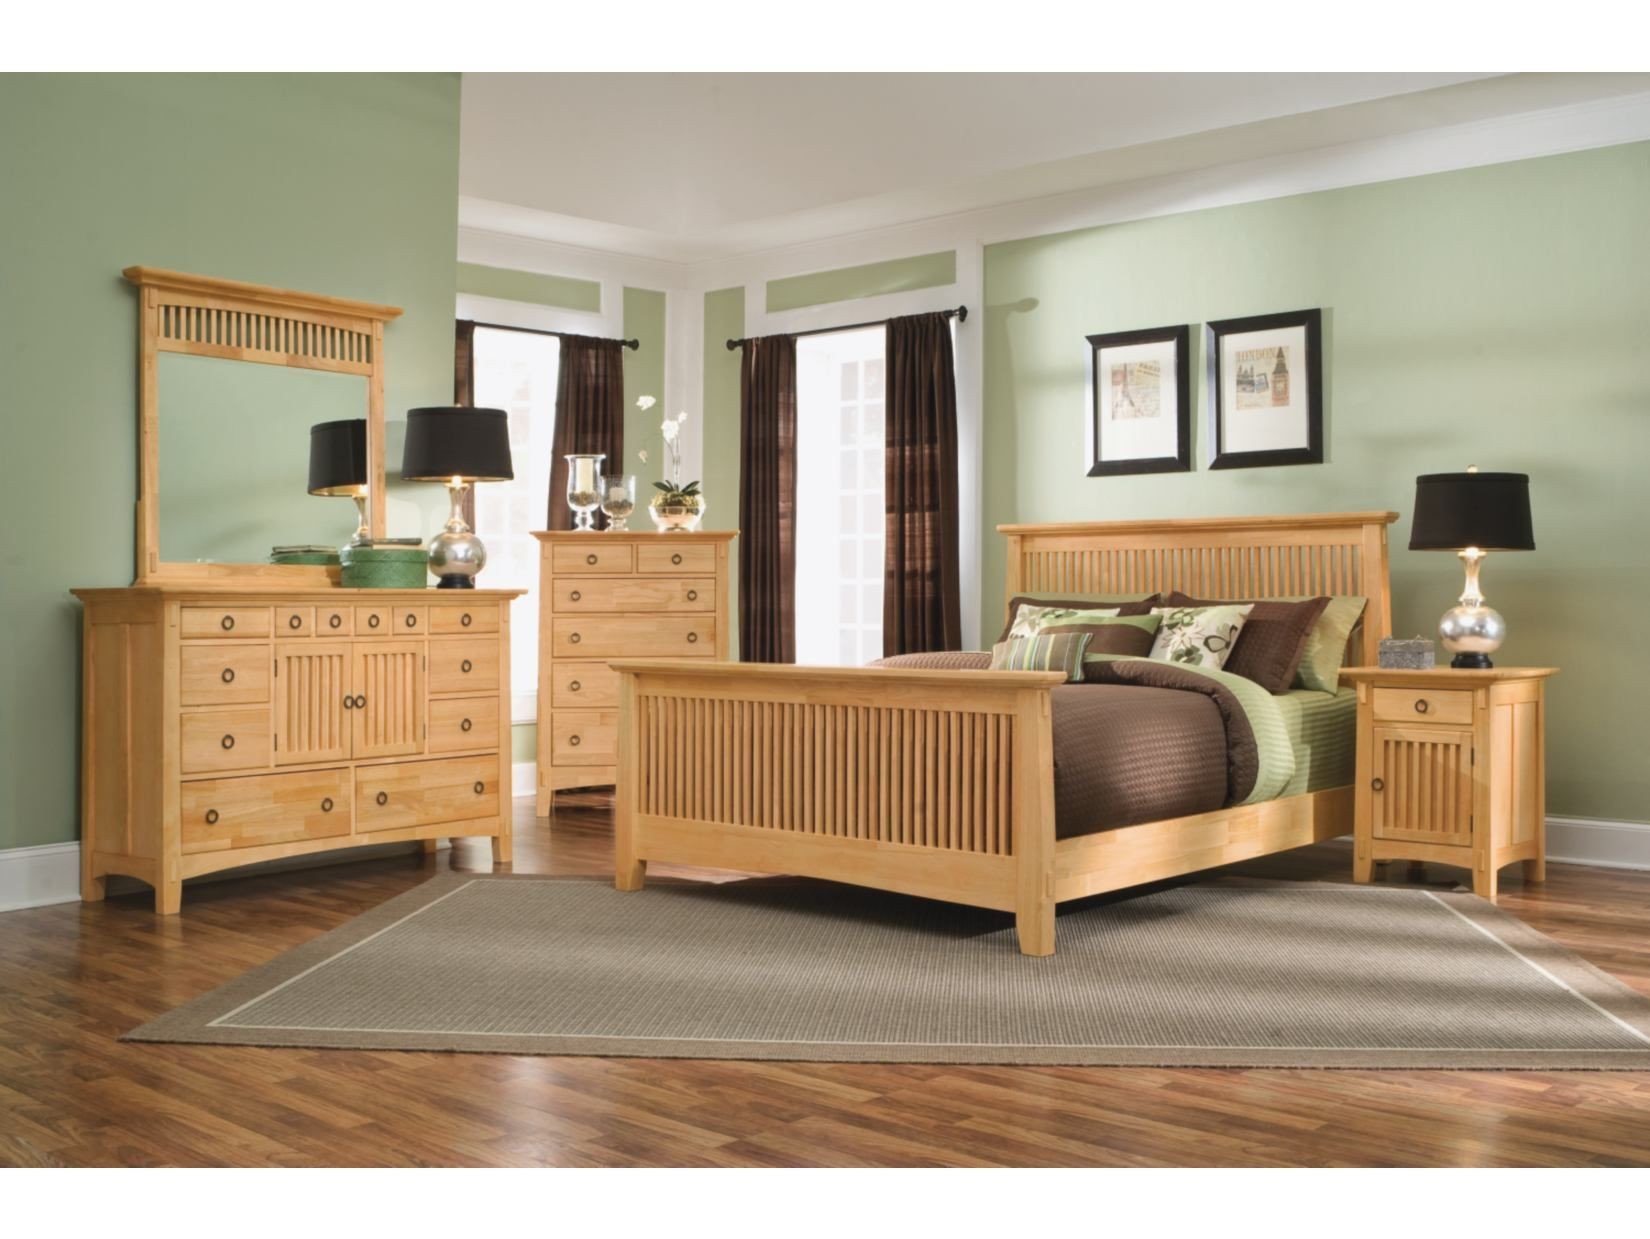 Value City Bedroom Set Luxury Arts &amp; Crafts 5 Pc Bedroom Package American Signature